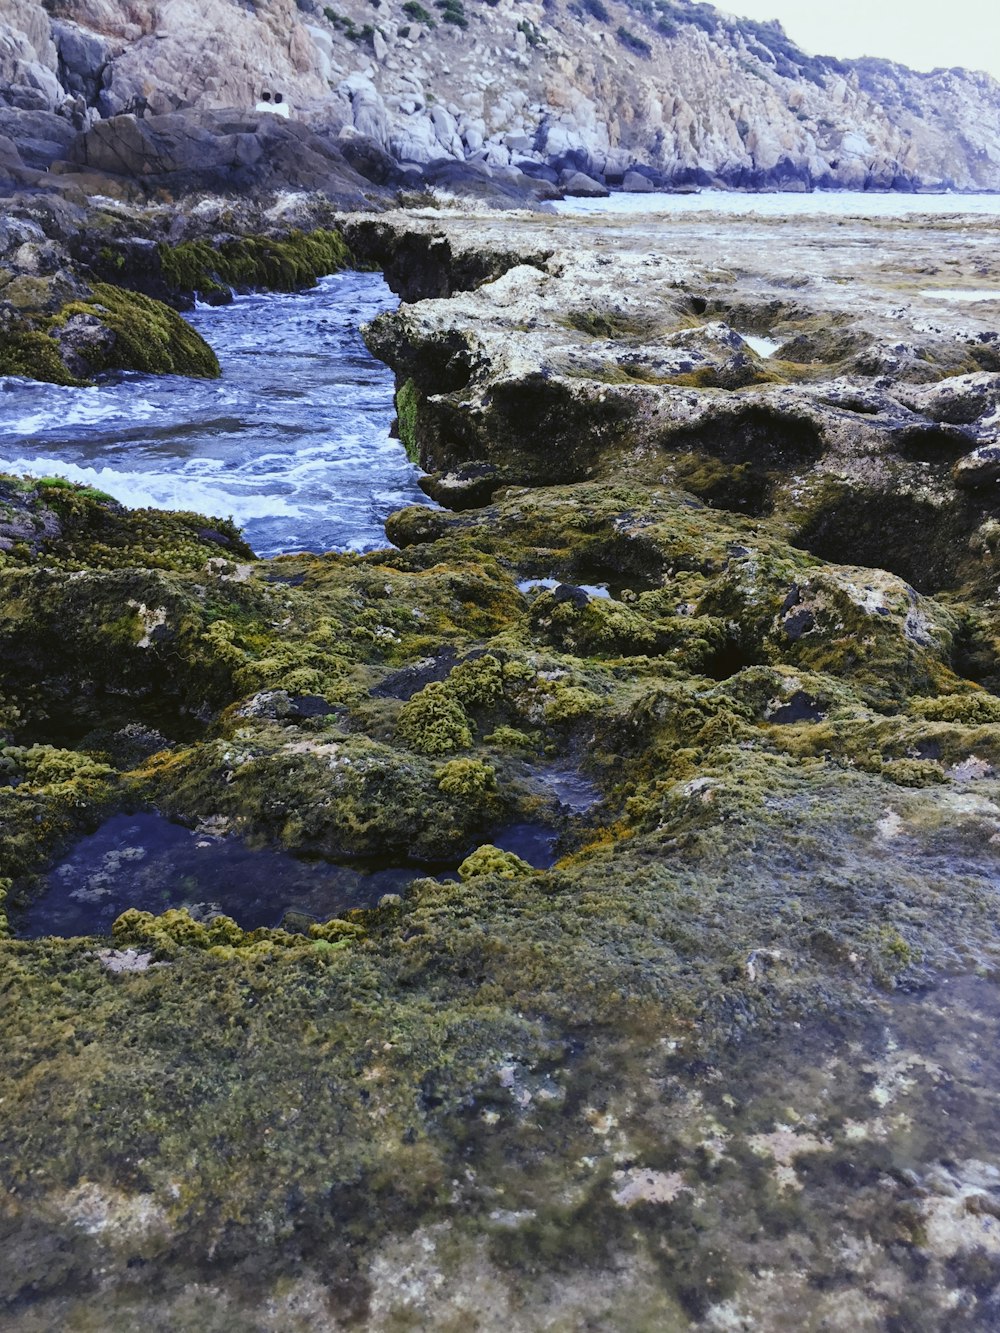 green moss on rocky shore during daytime